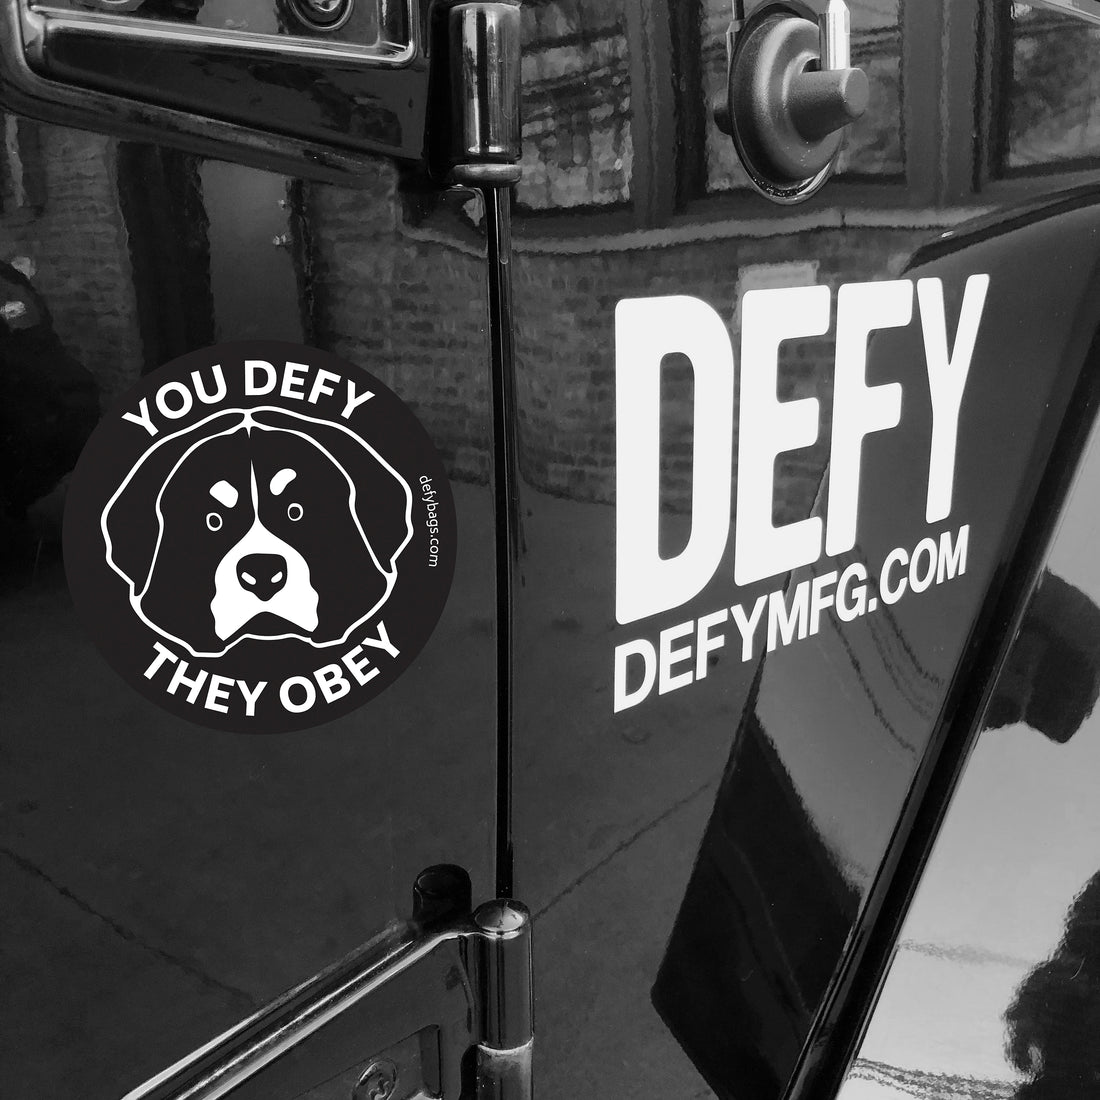 YOU DEFY, THEY OBEY | The Otis Magnet